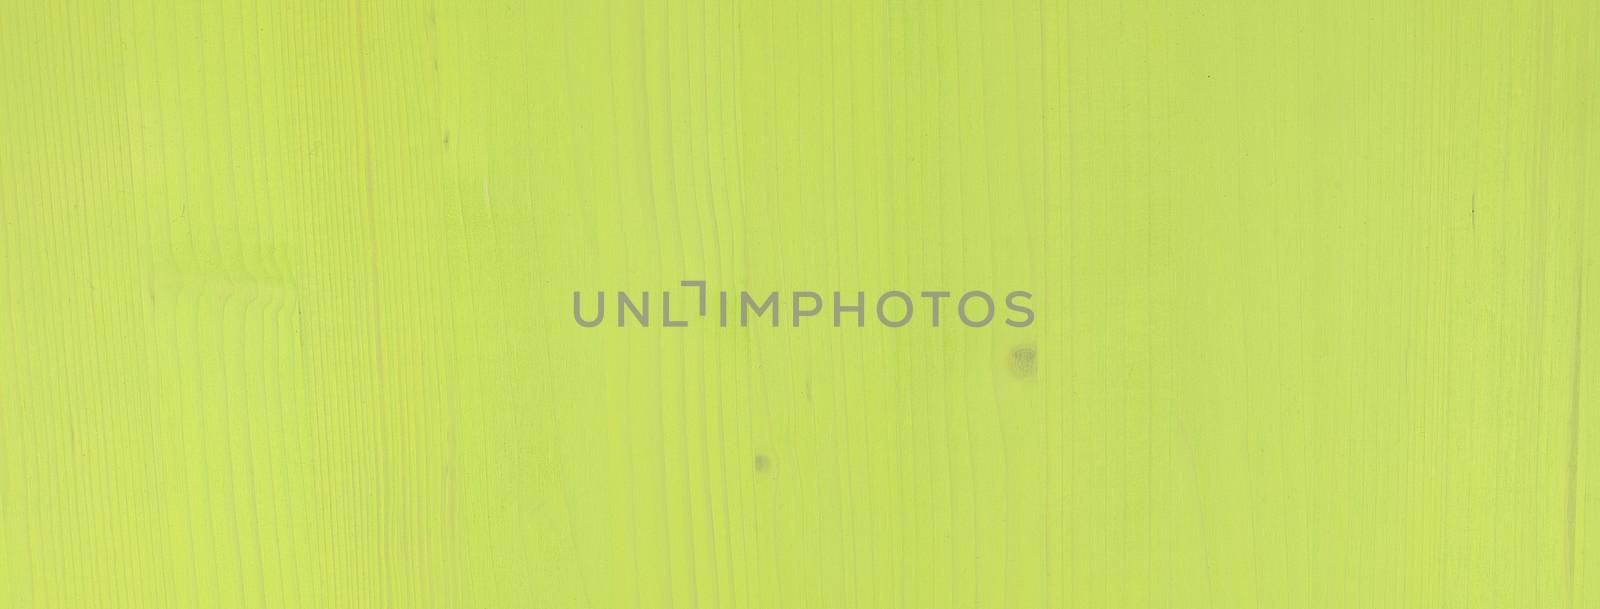 Texture of a green wooden board. May be used as background